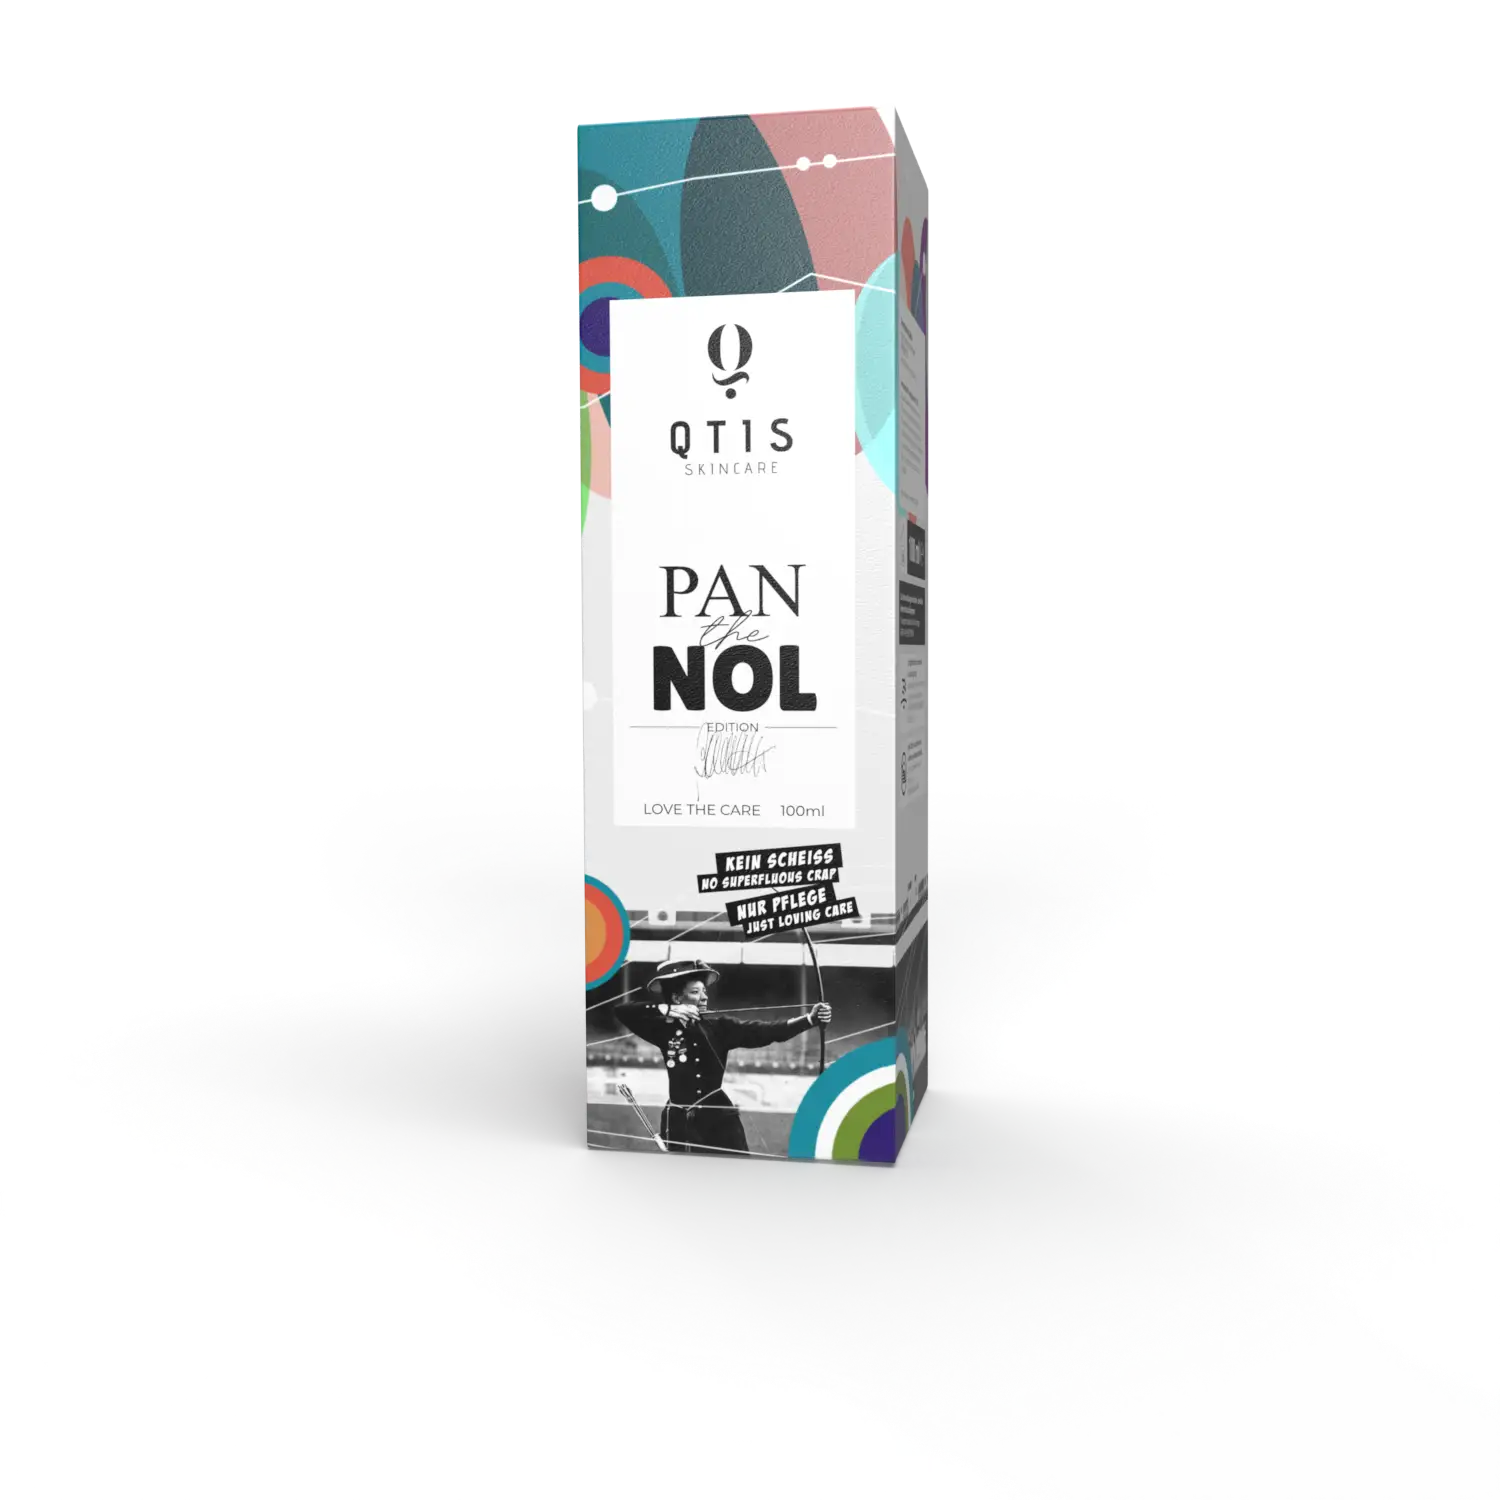 Belicta Castelbarco for QTIS skincare. Special edition of Pan The Nol